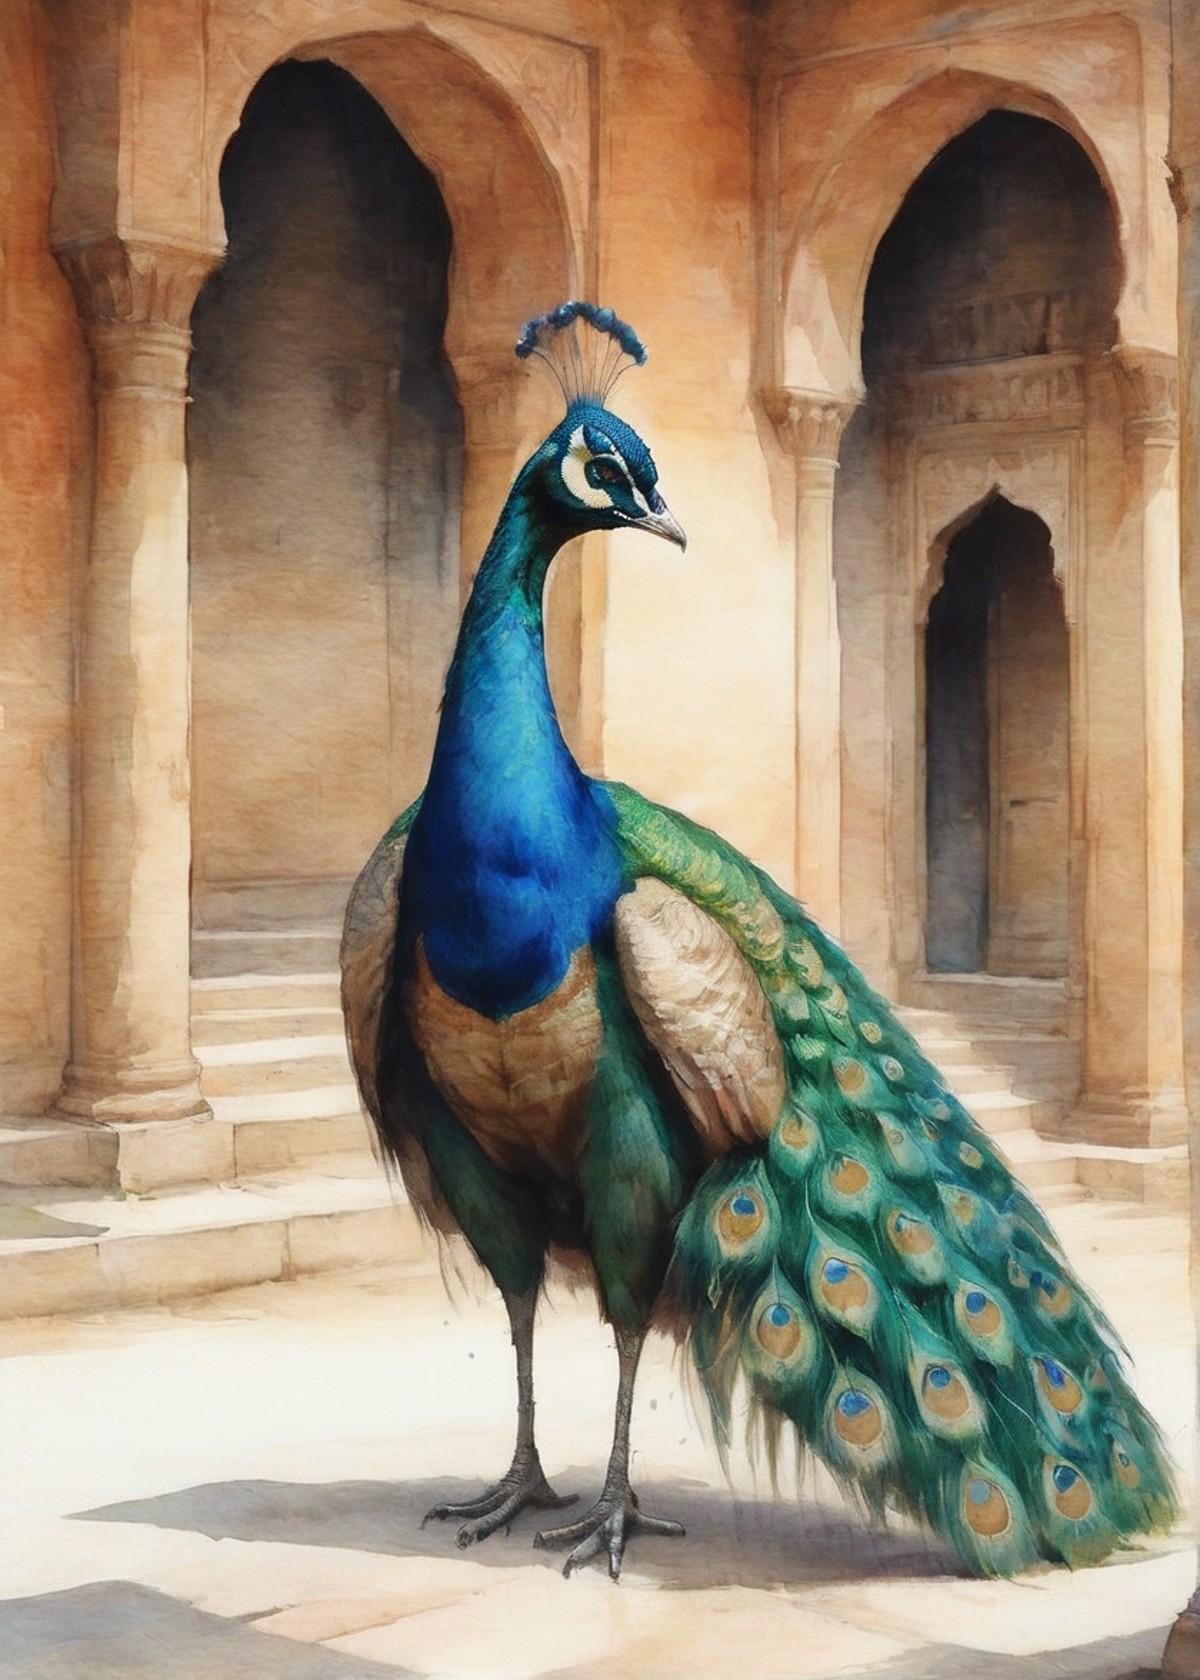 A majestic peacock displaying its vibrant feathers in the courtyard of an old Indian palace